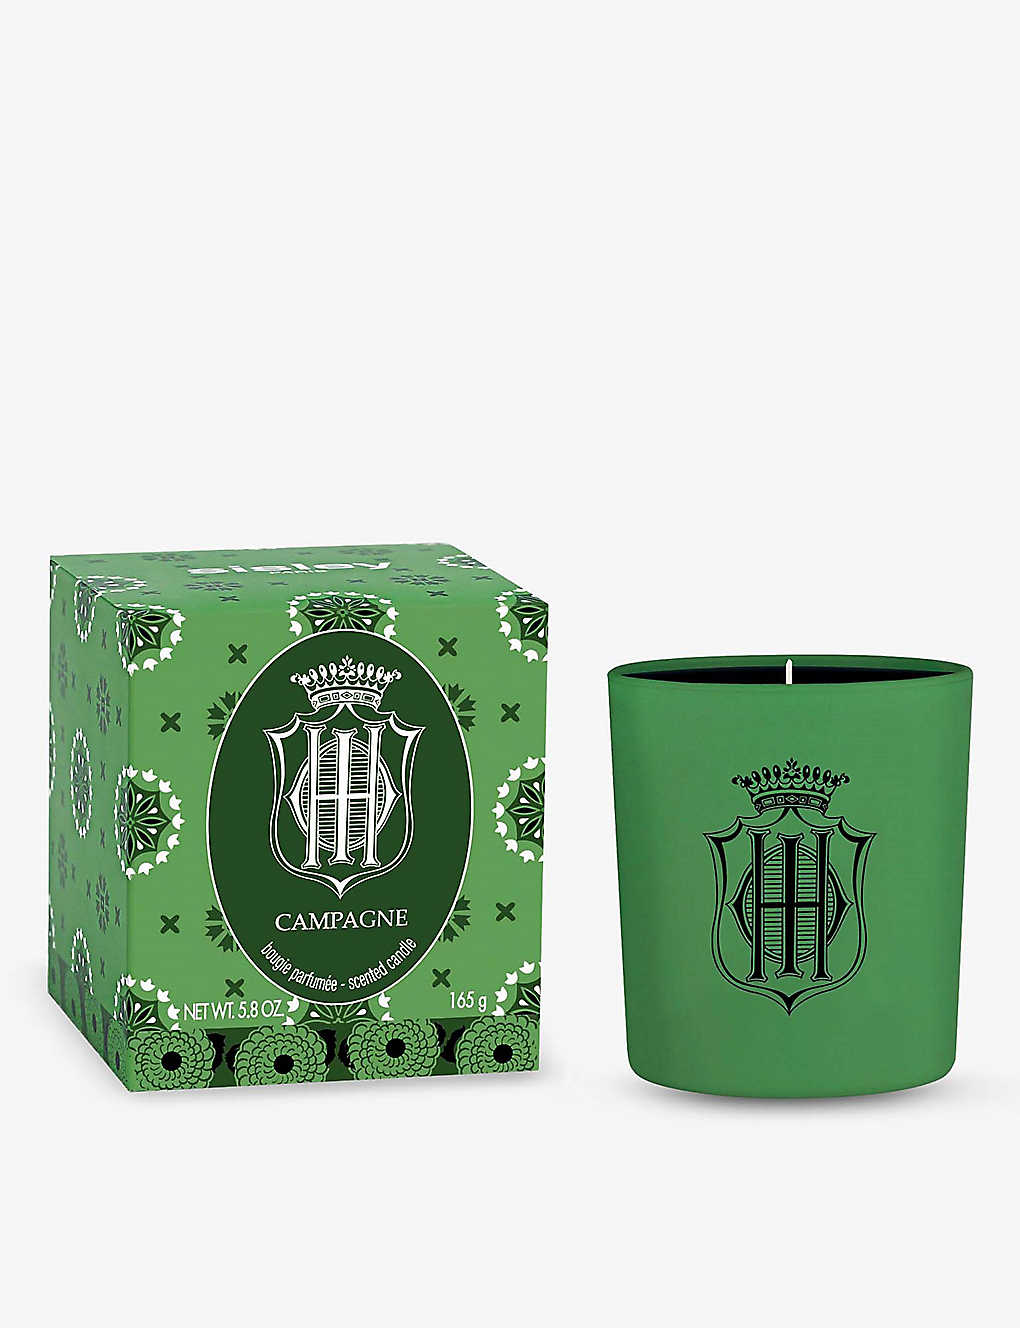 Sisley Paris Campagne Candle, 5.8 Oz./ 165g In Green